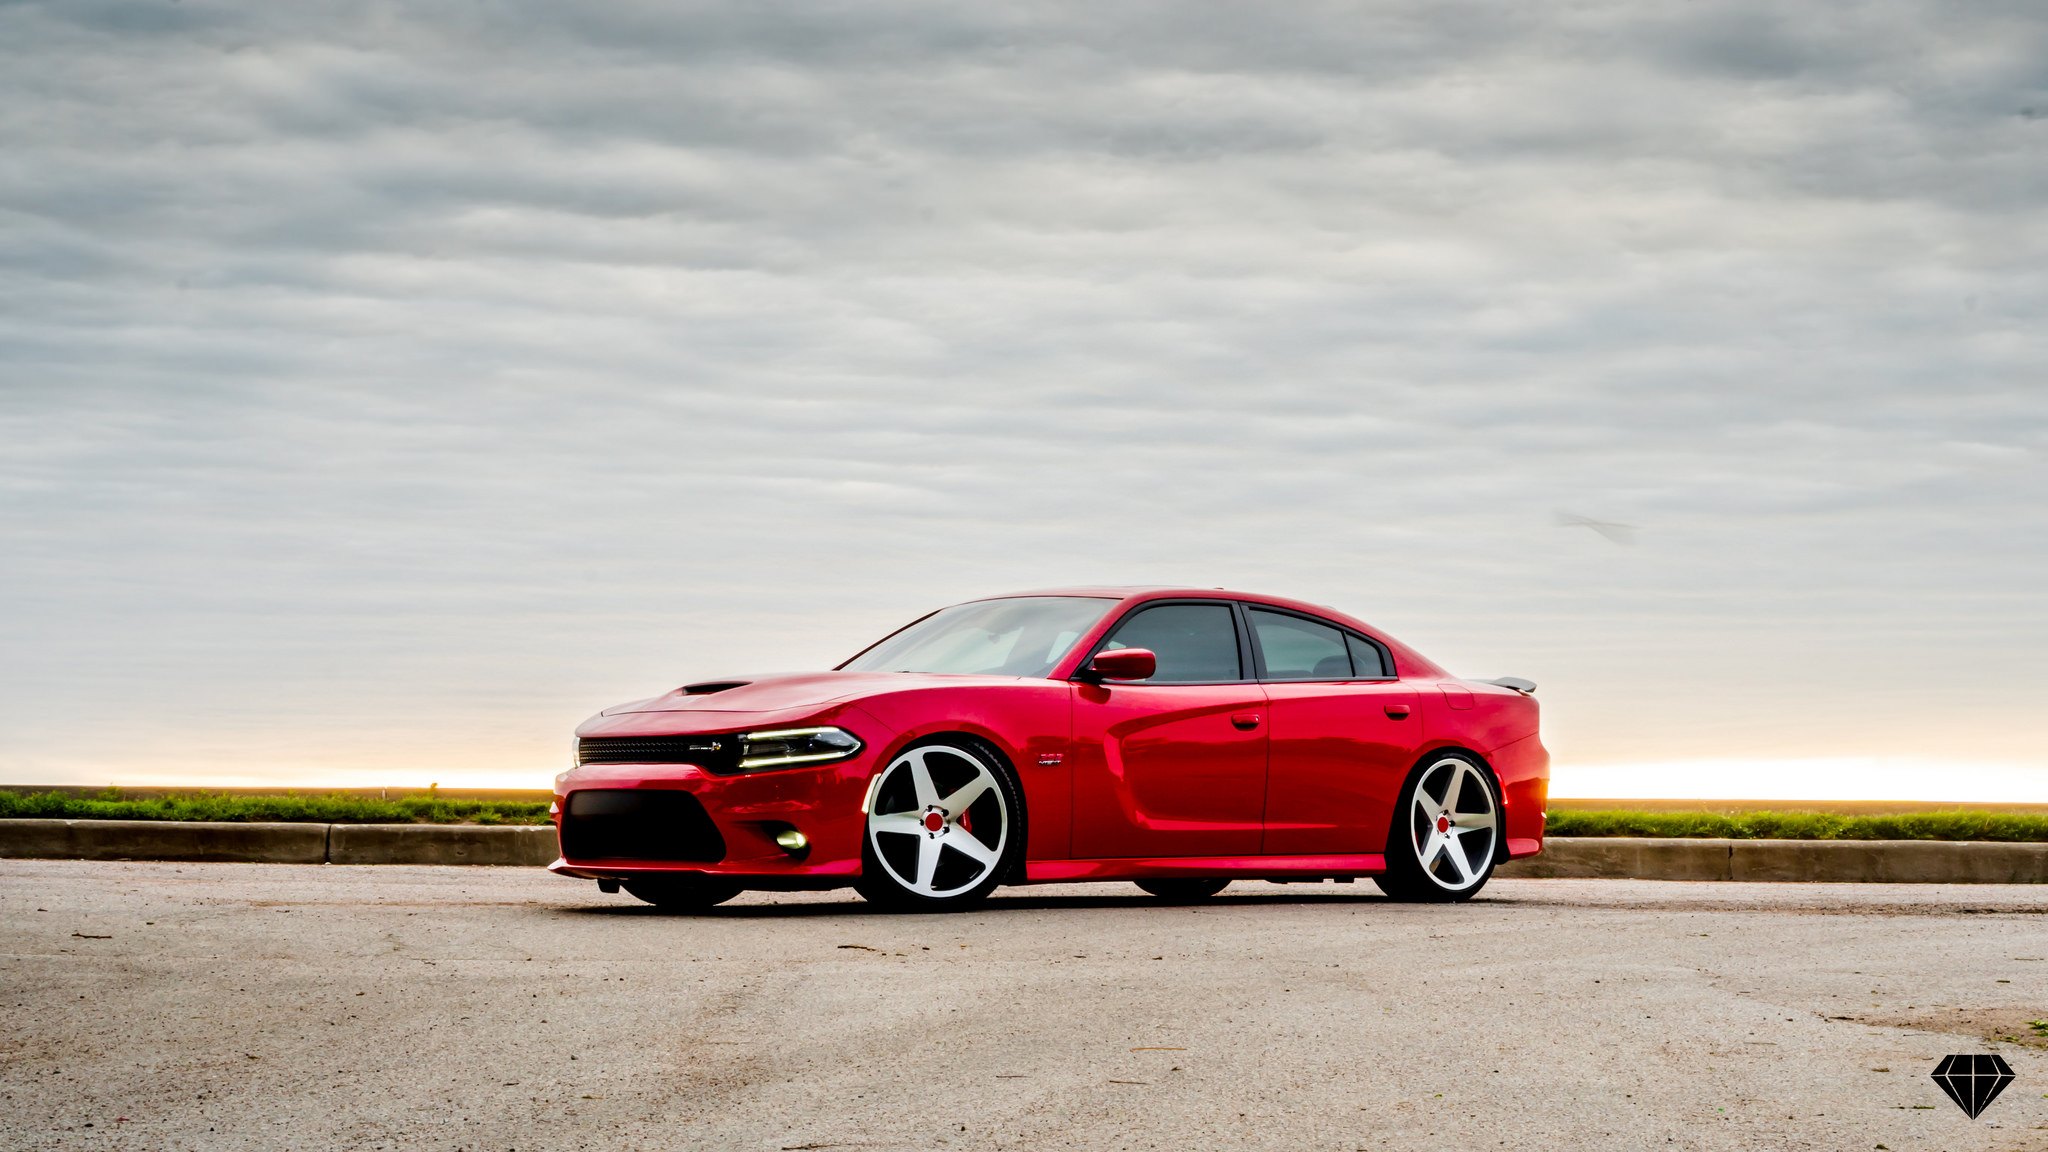 Blacked Out Mesh Grille on Red Dodge Charger - Photo by Blaque Diamond Wheels